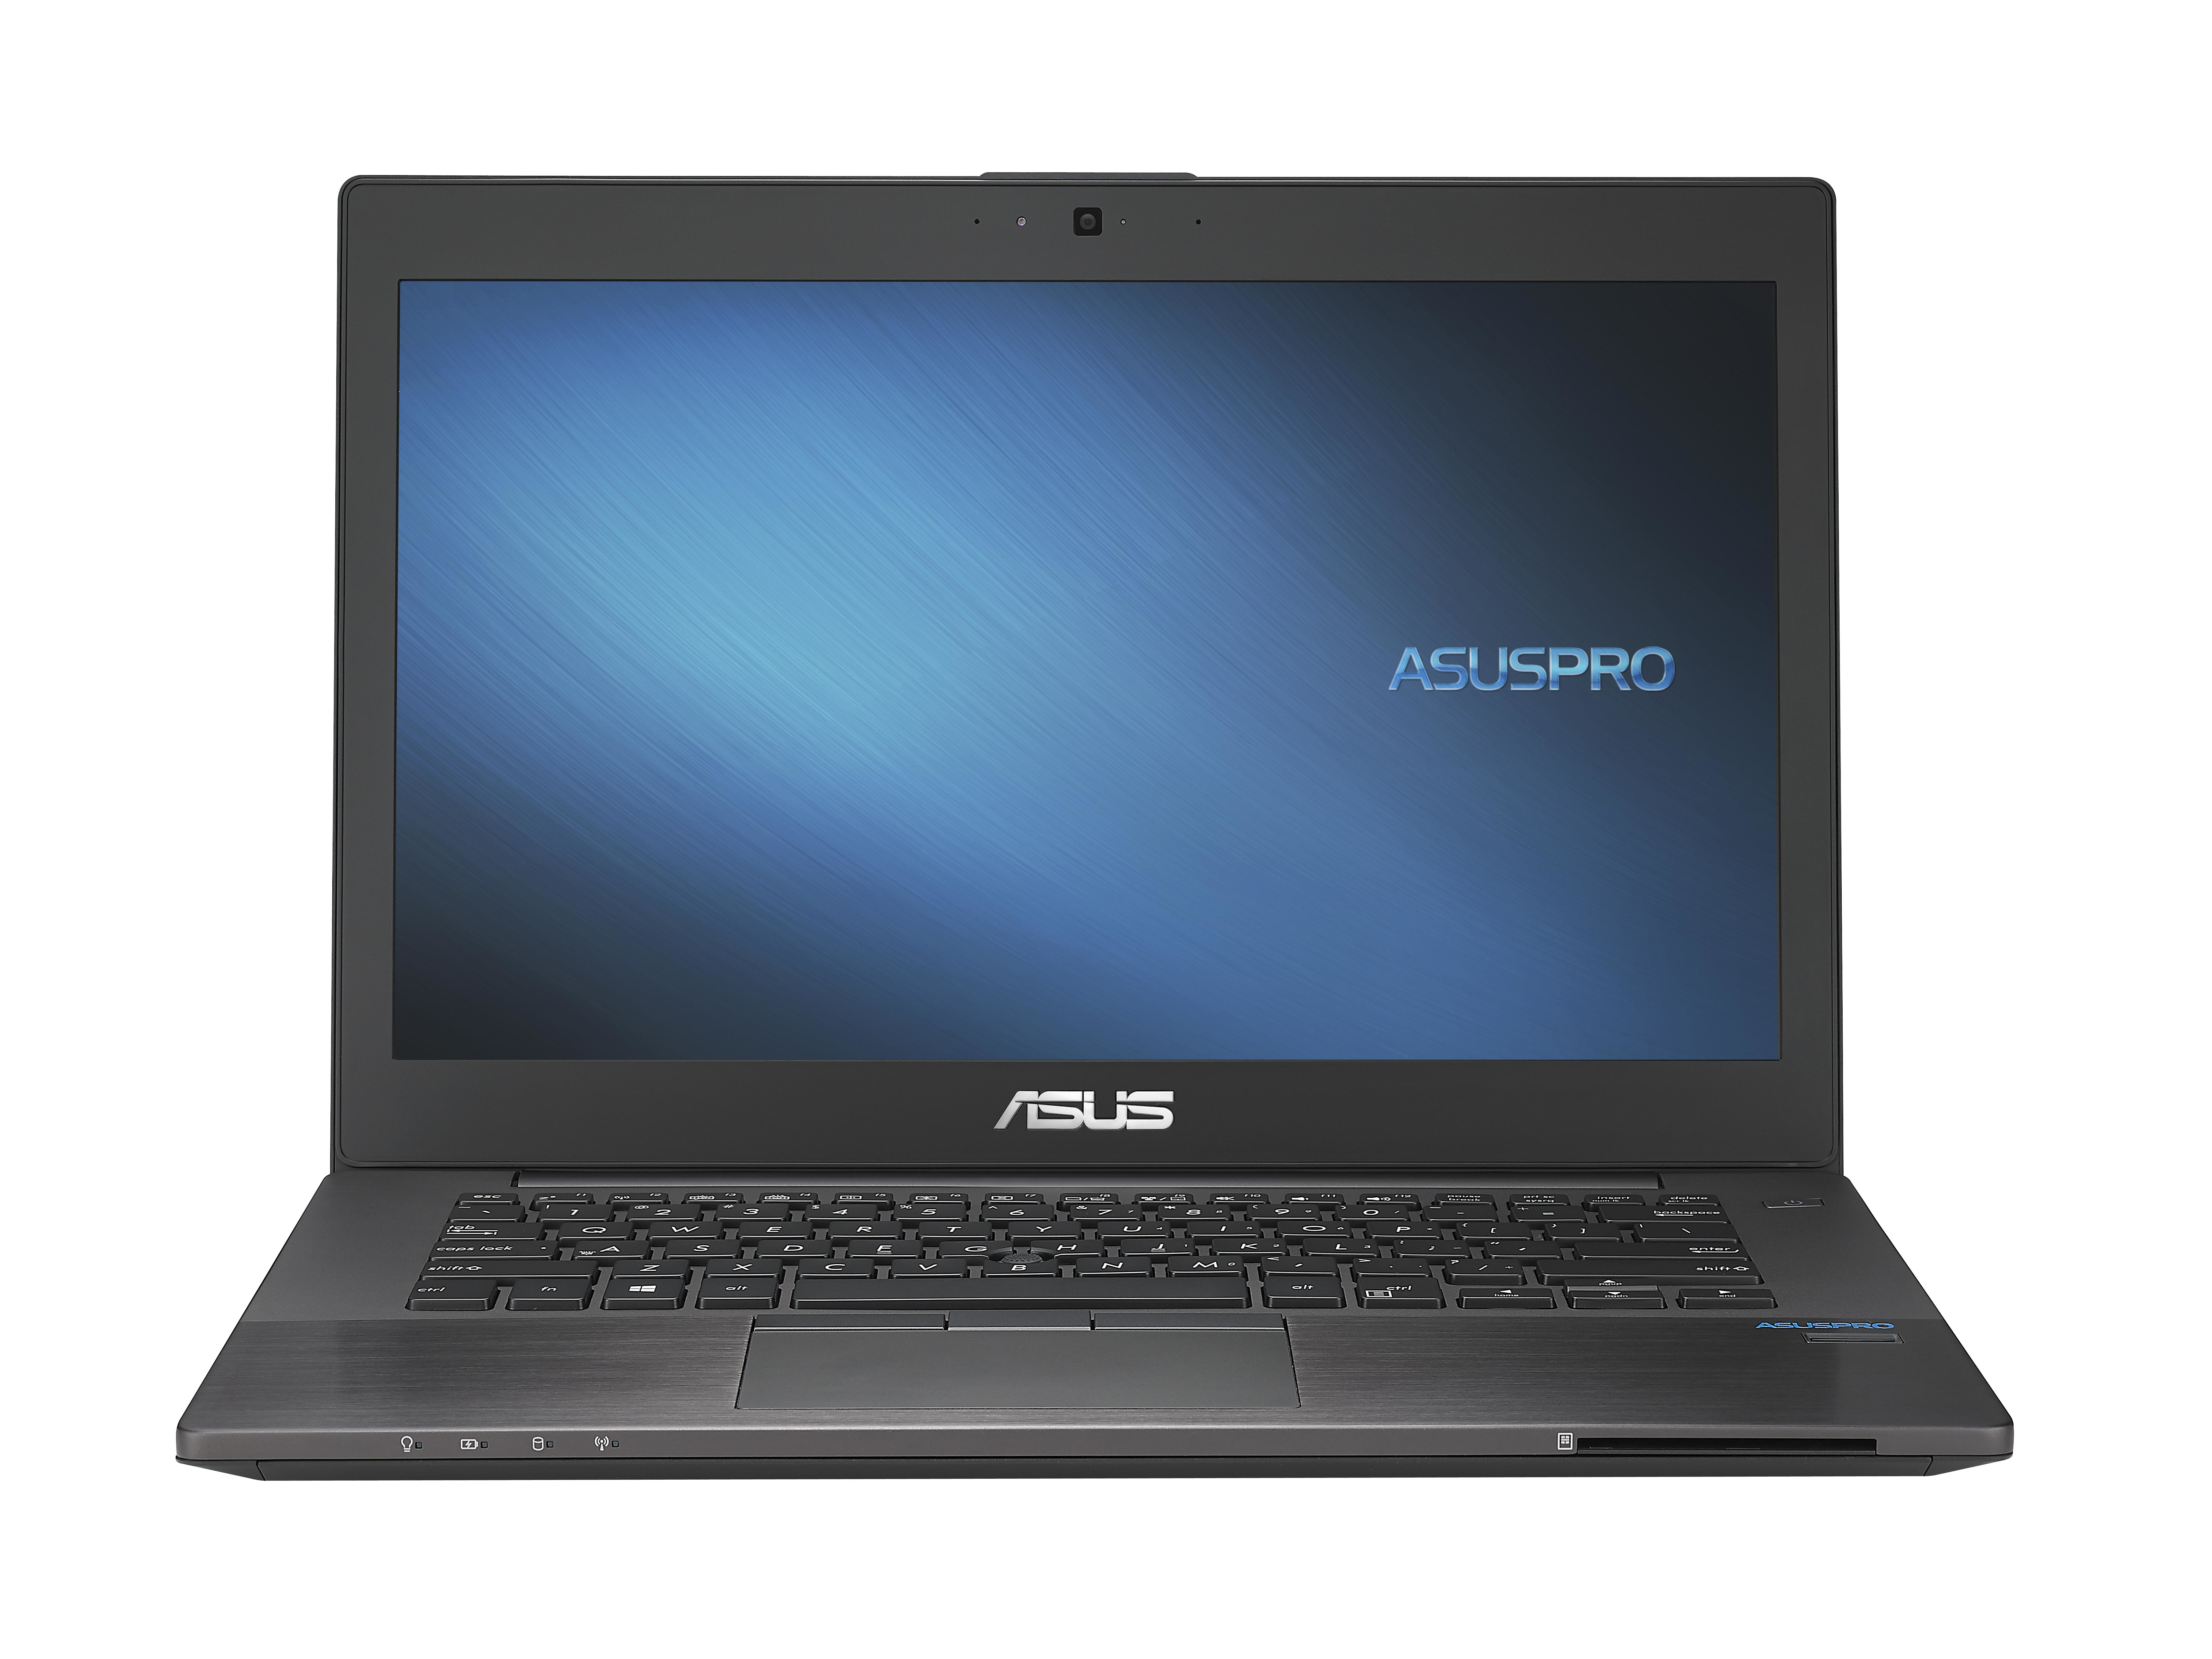 ASUS PRO B ADVANCED B8430UA-FA0083E 2.5GHz i7-6500U 35.6cm/14'' 1920 x 1080Pixel - Picture 1 of 1